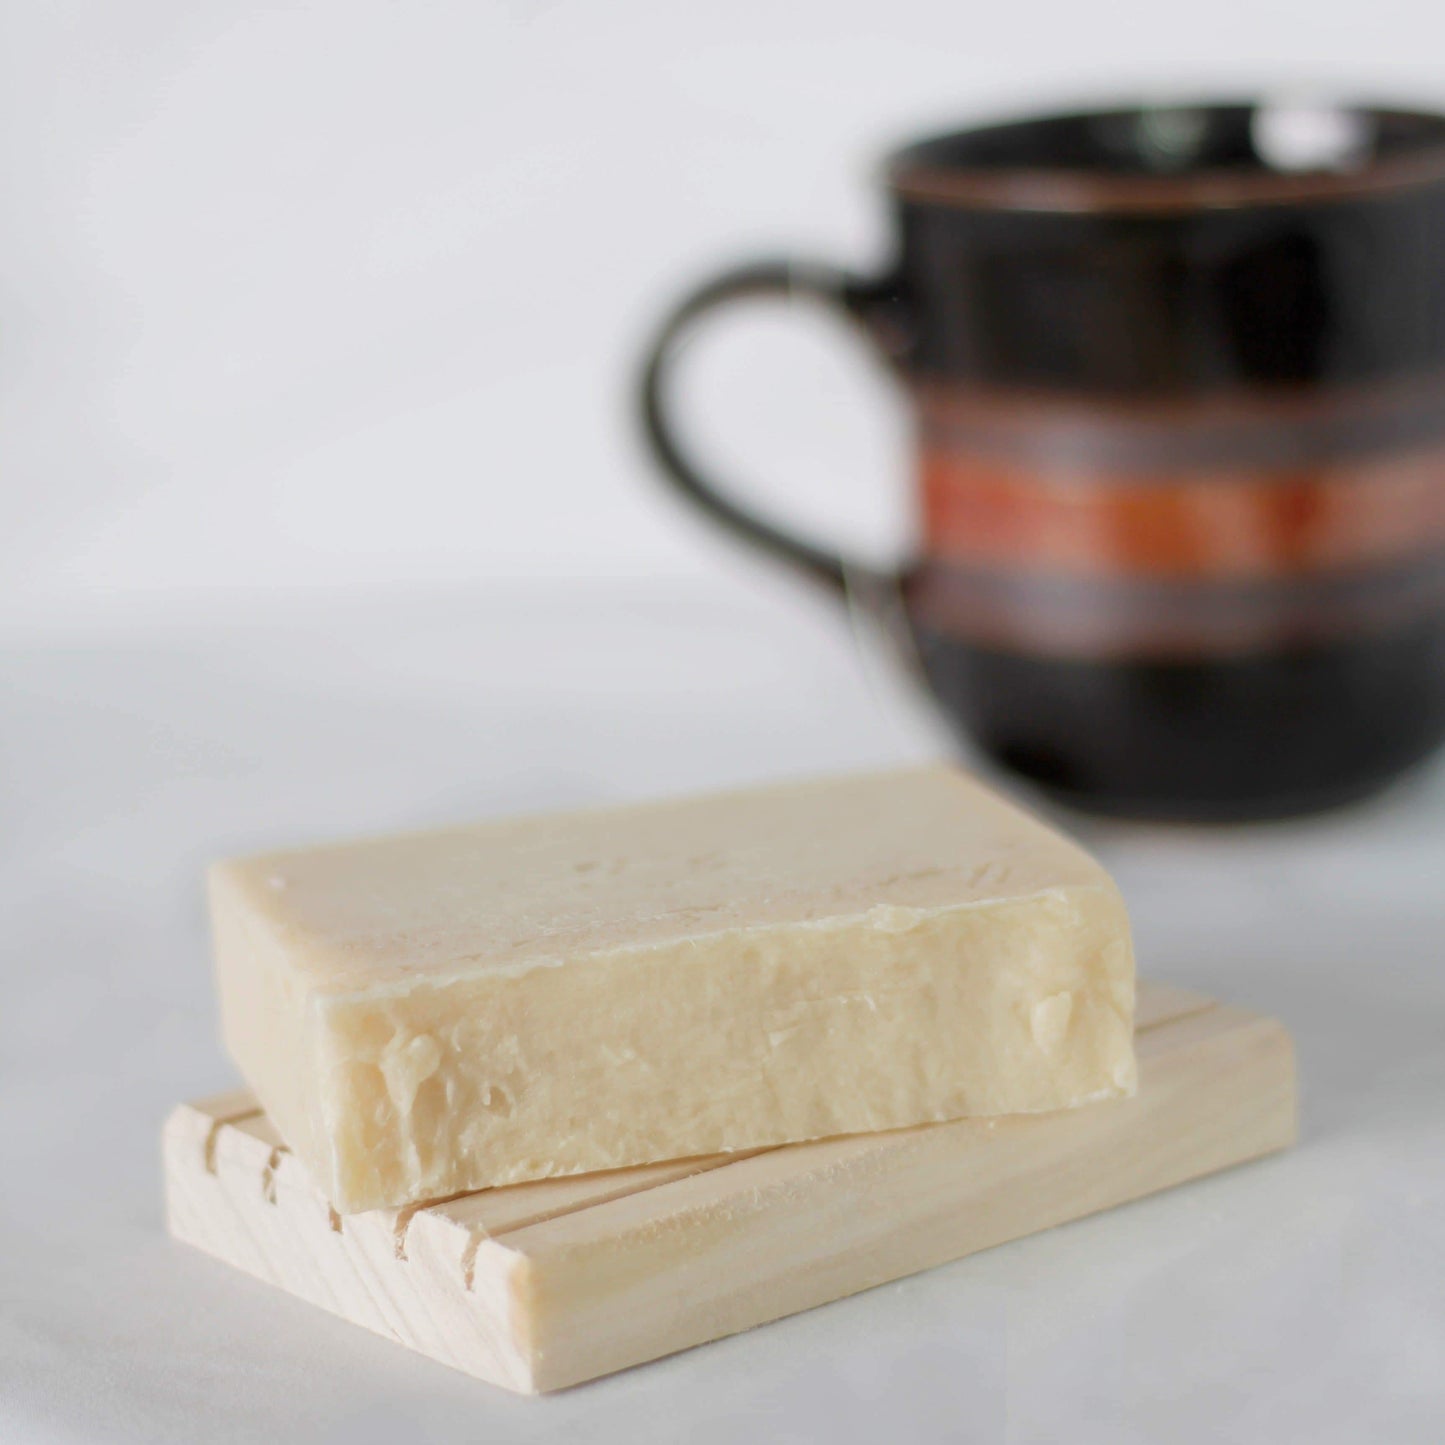 Cream colored soap bar on a wooden soap holder with a mug in the background.